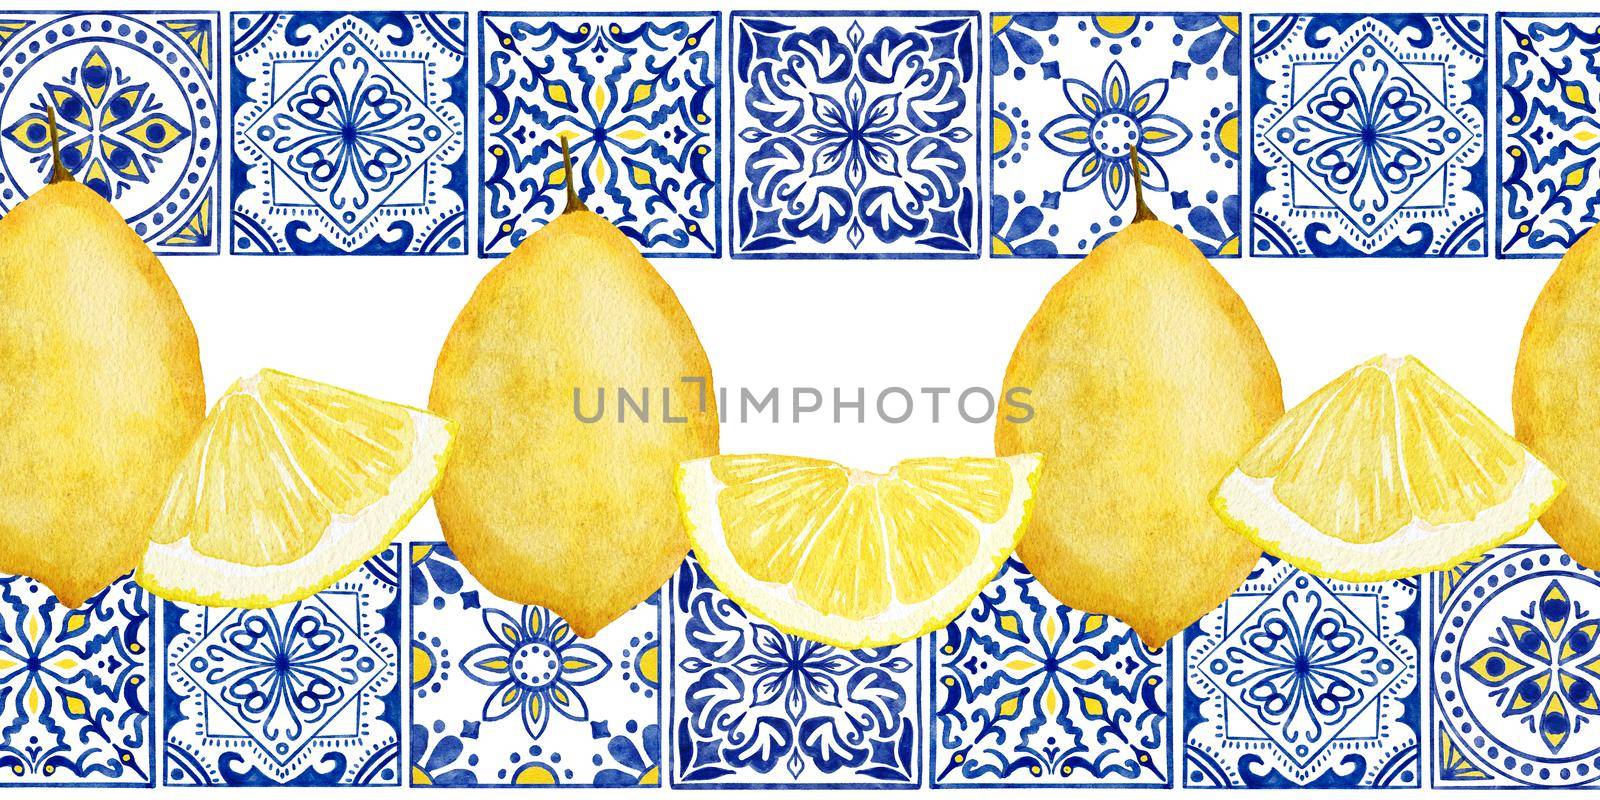 Hand drawn watercolor seamless border with yellow citrus lemons, blue white portugese azulejo tiles. Bright summer holiday vintage frame, tasty fruit healthy juicy ripe. by Lagmar